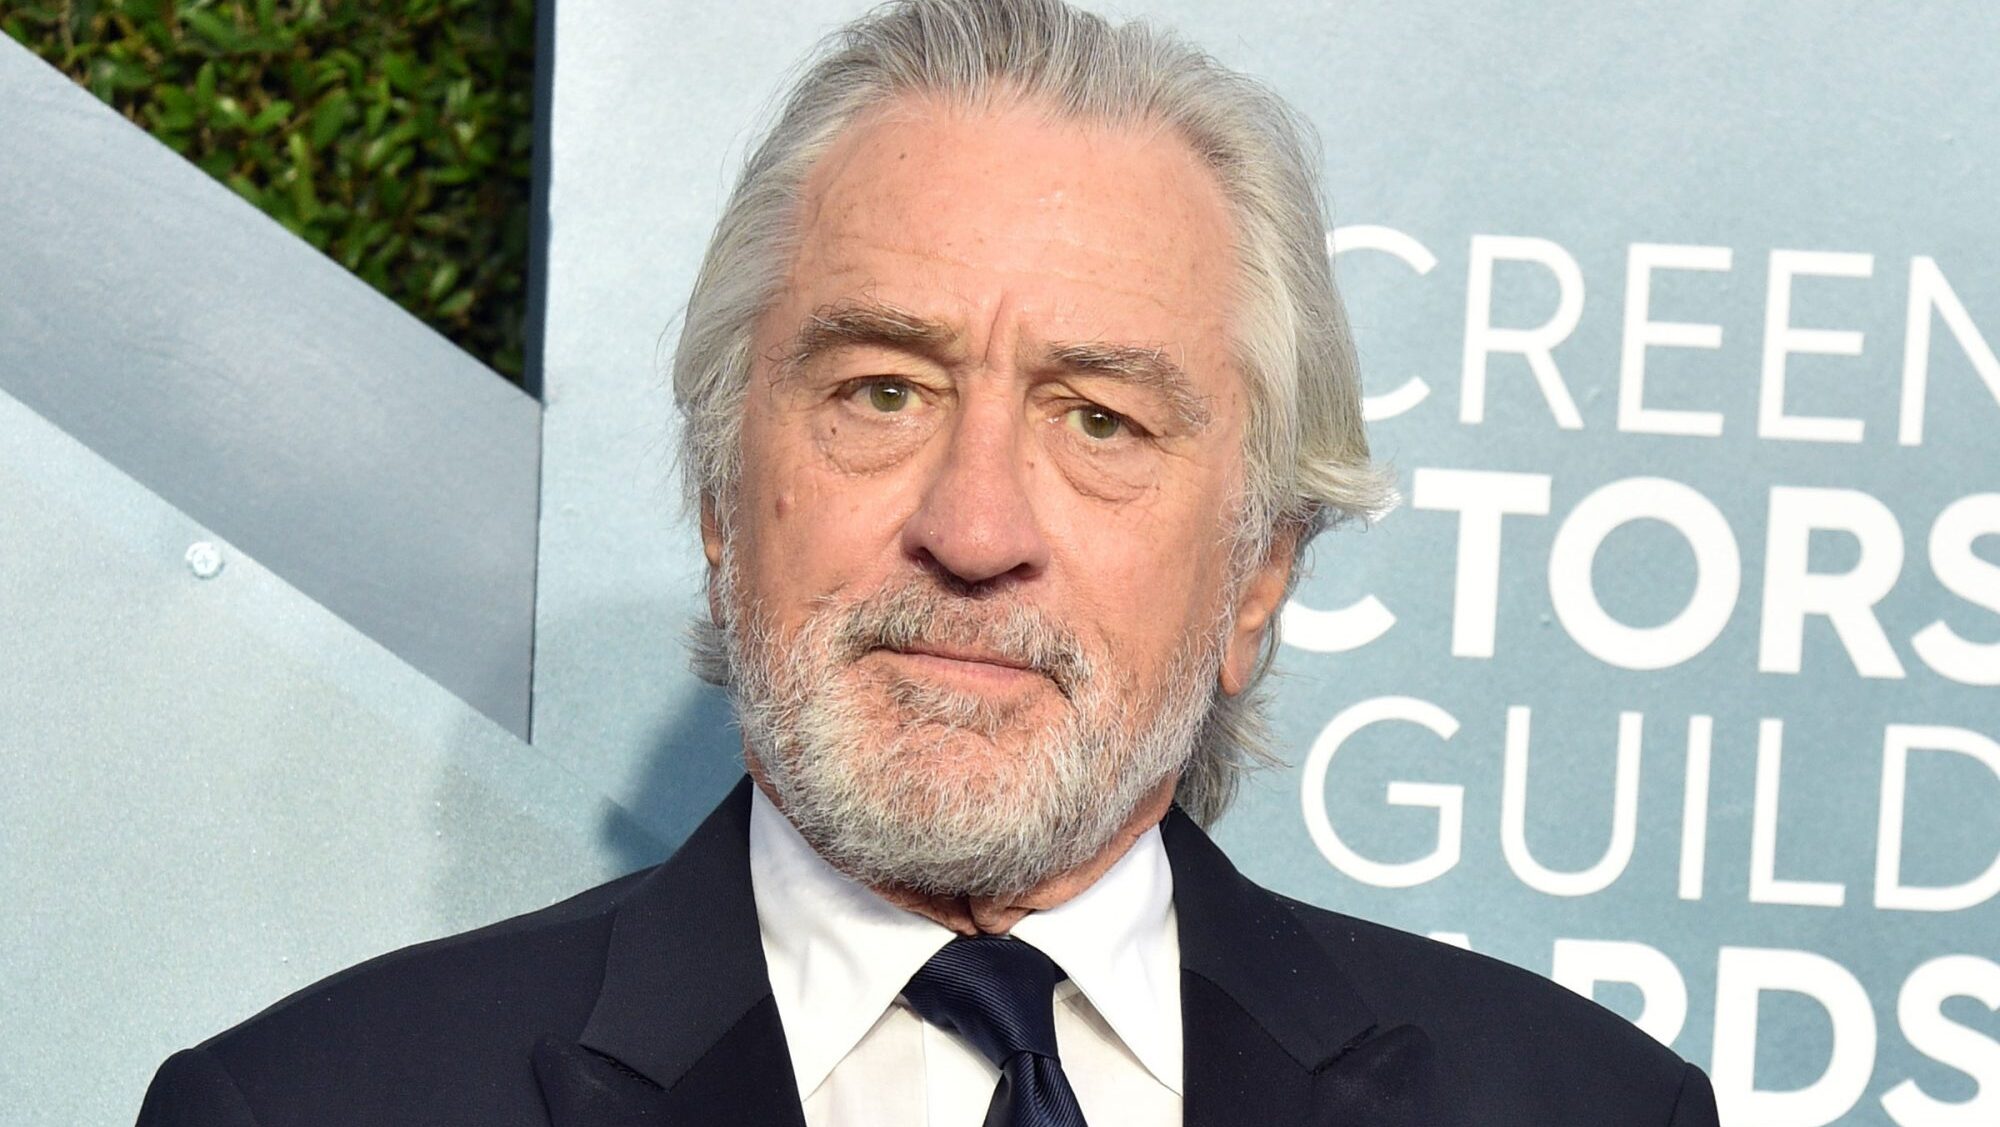 Robert De Niro is the oldest and richest actor in the world.